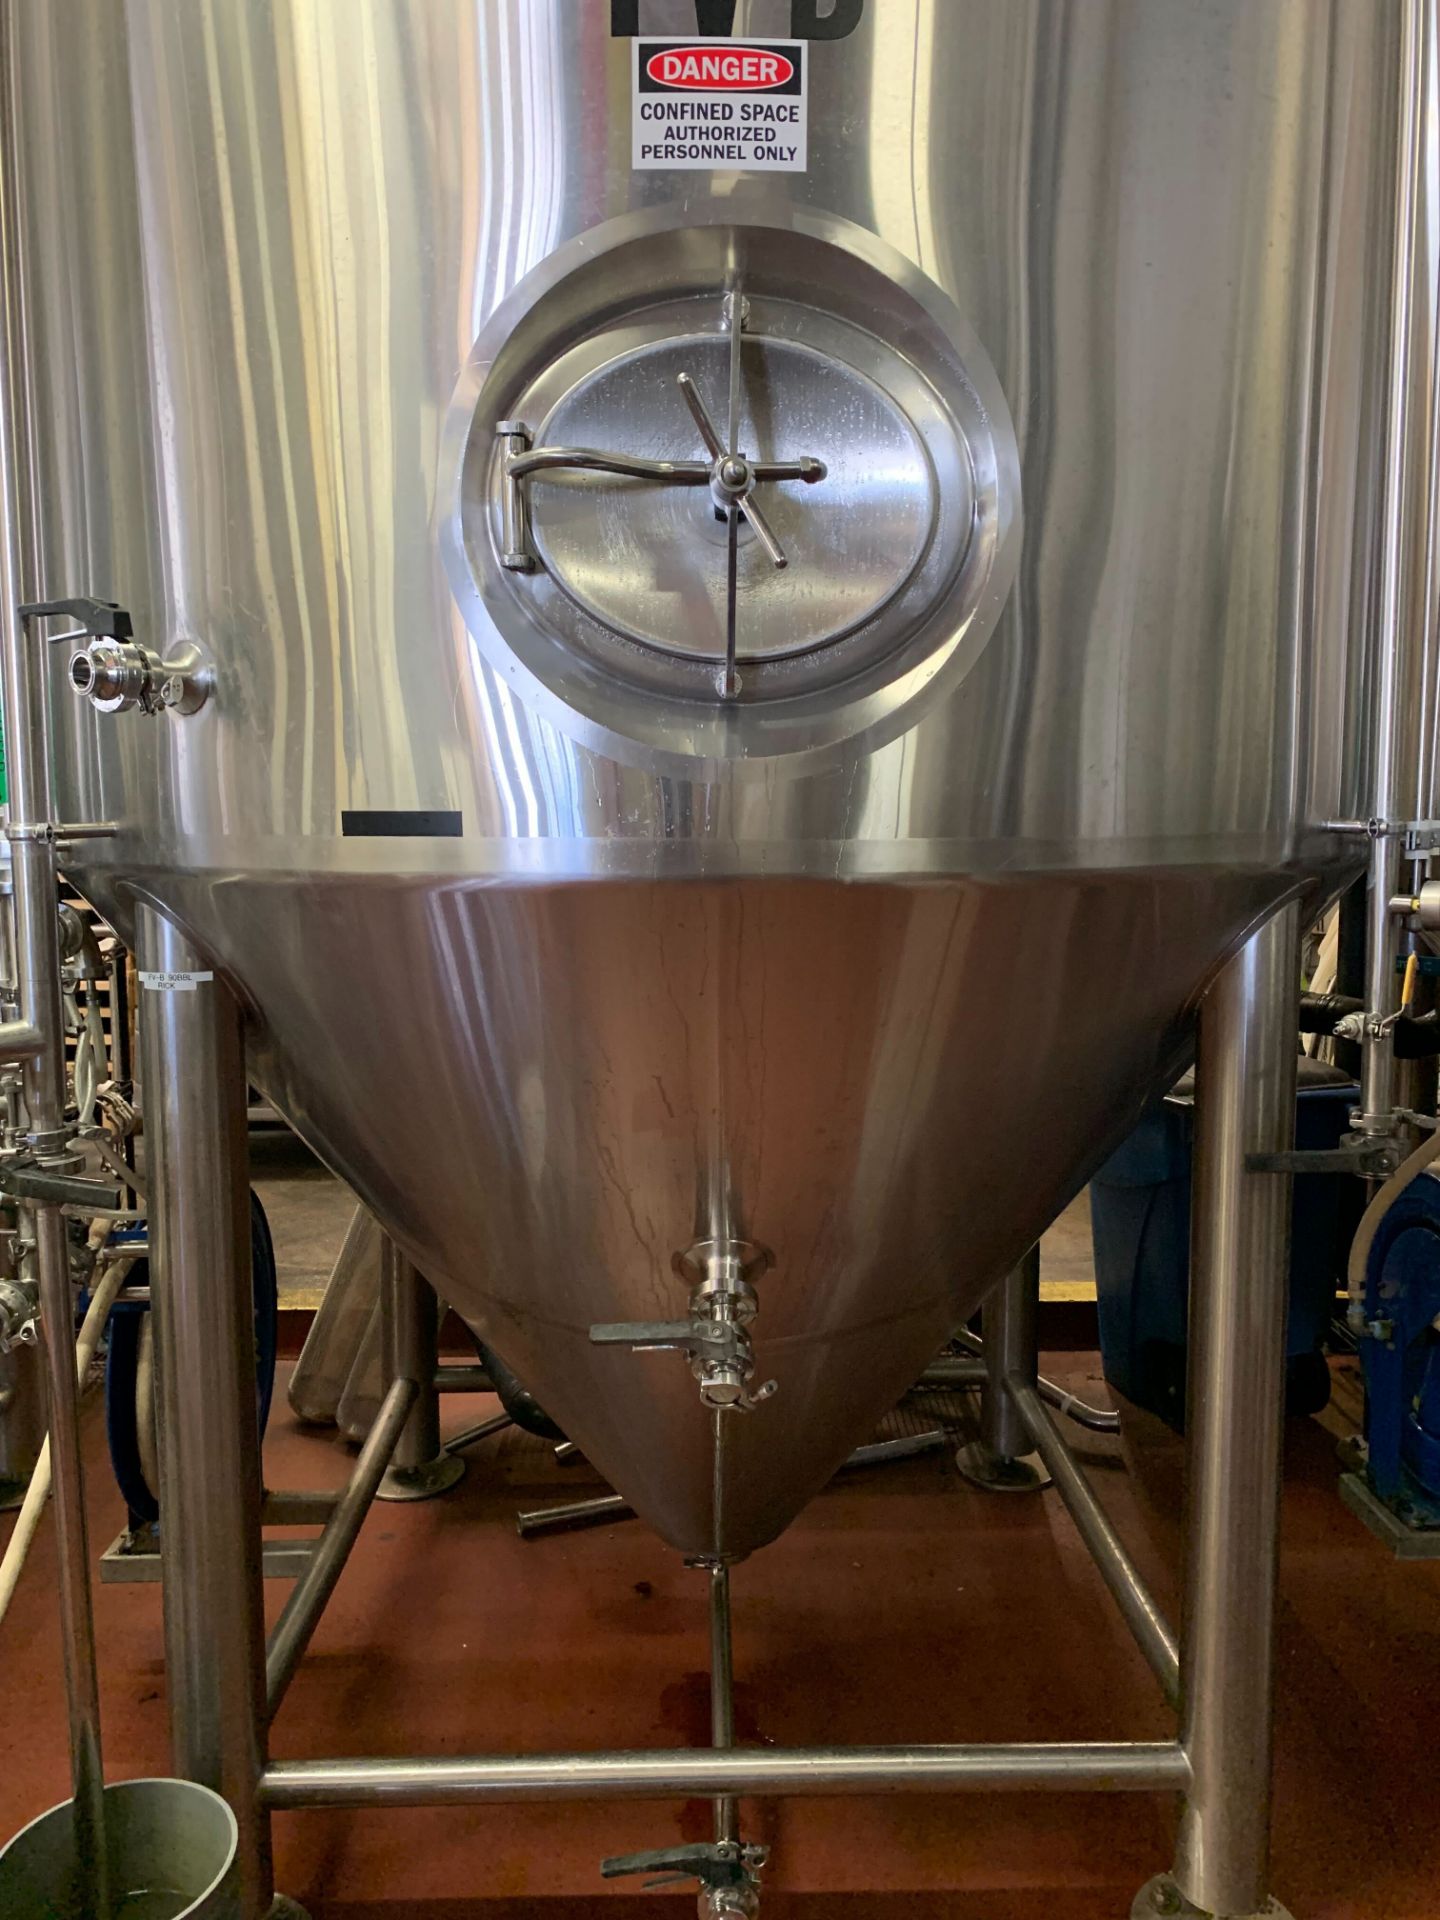 2014 Premier Stainless Sourced 90 BBL Fermenter, Glycol Jacketed, Steep | Rig Fee: $2300 w/ Saddles - Image 2 of 5